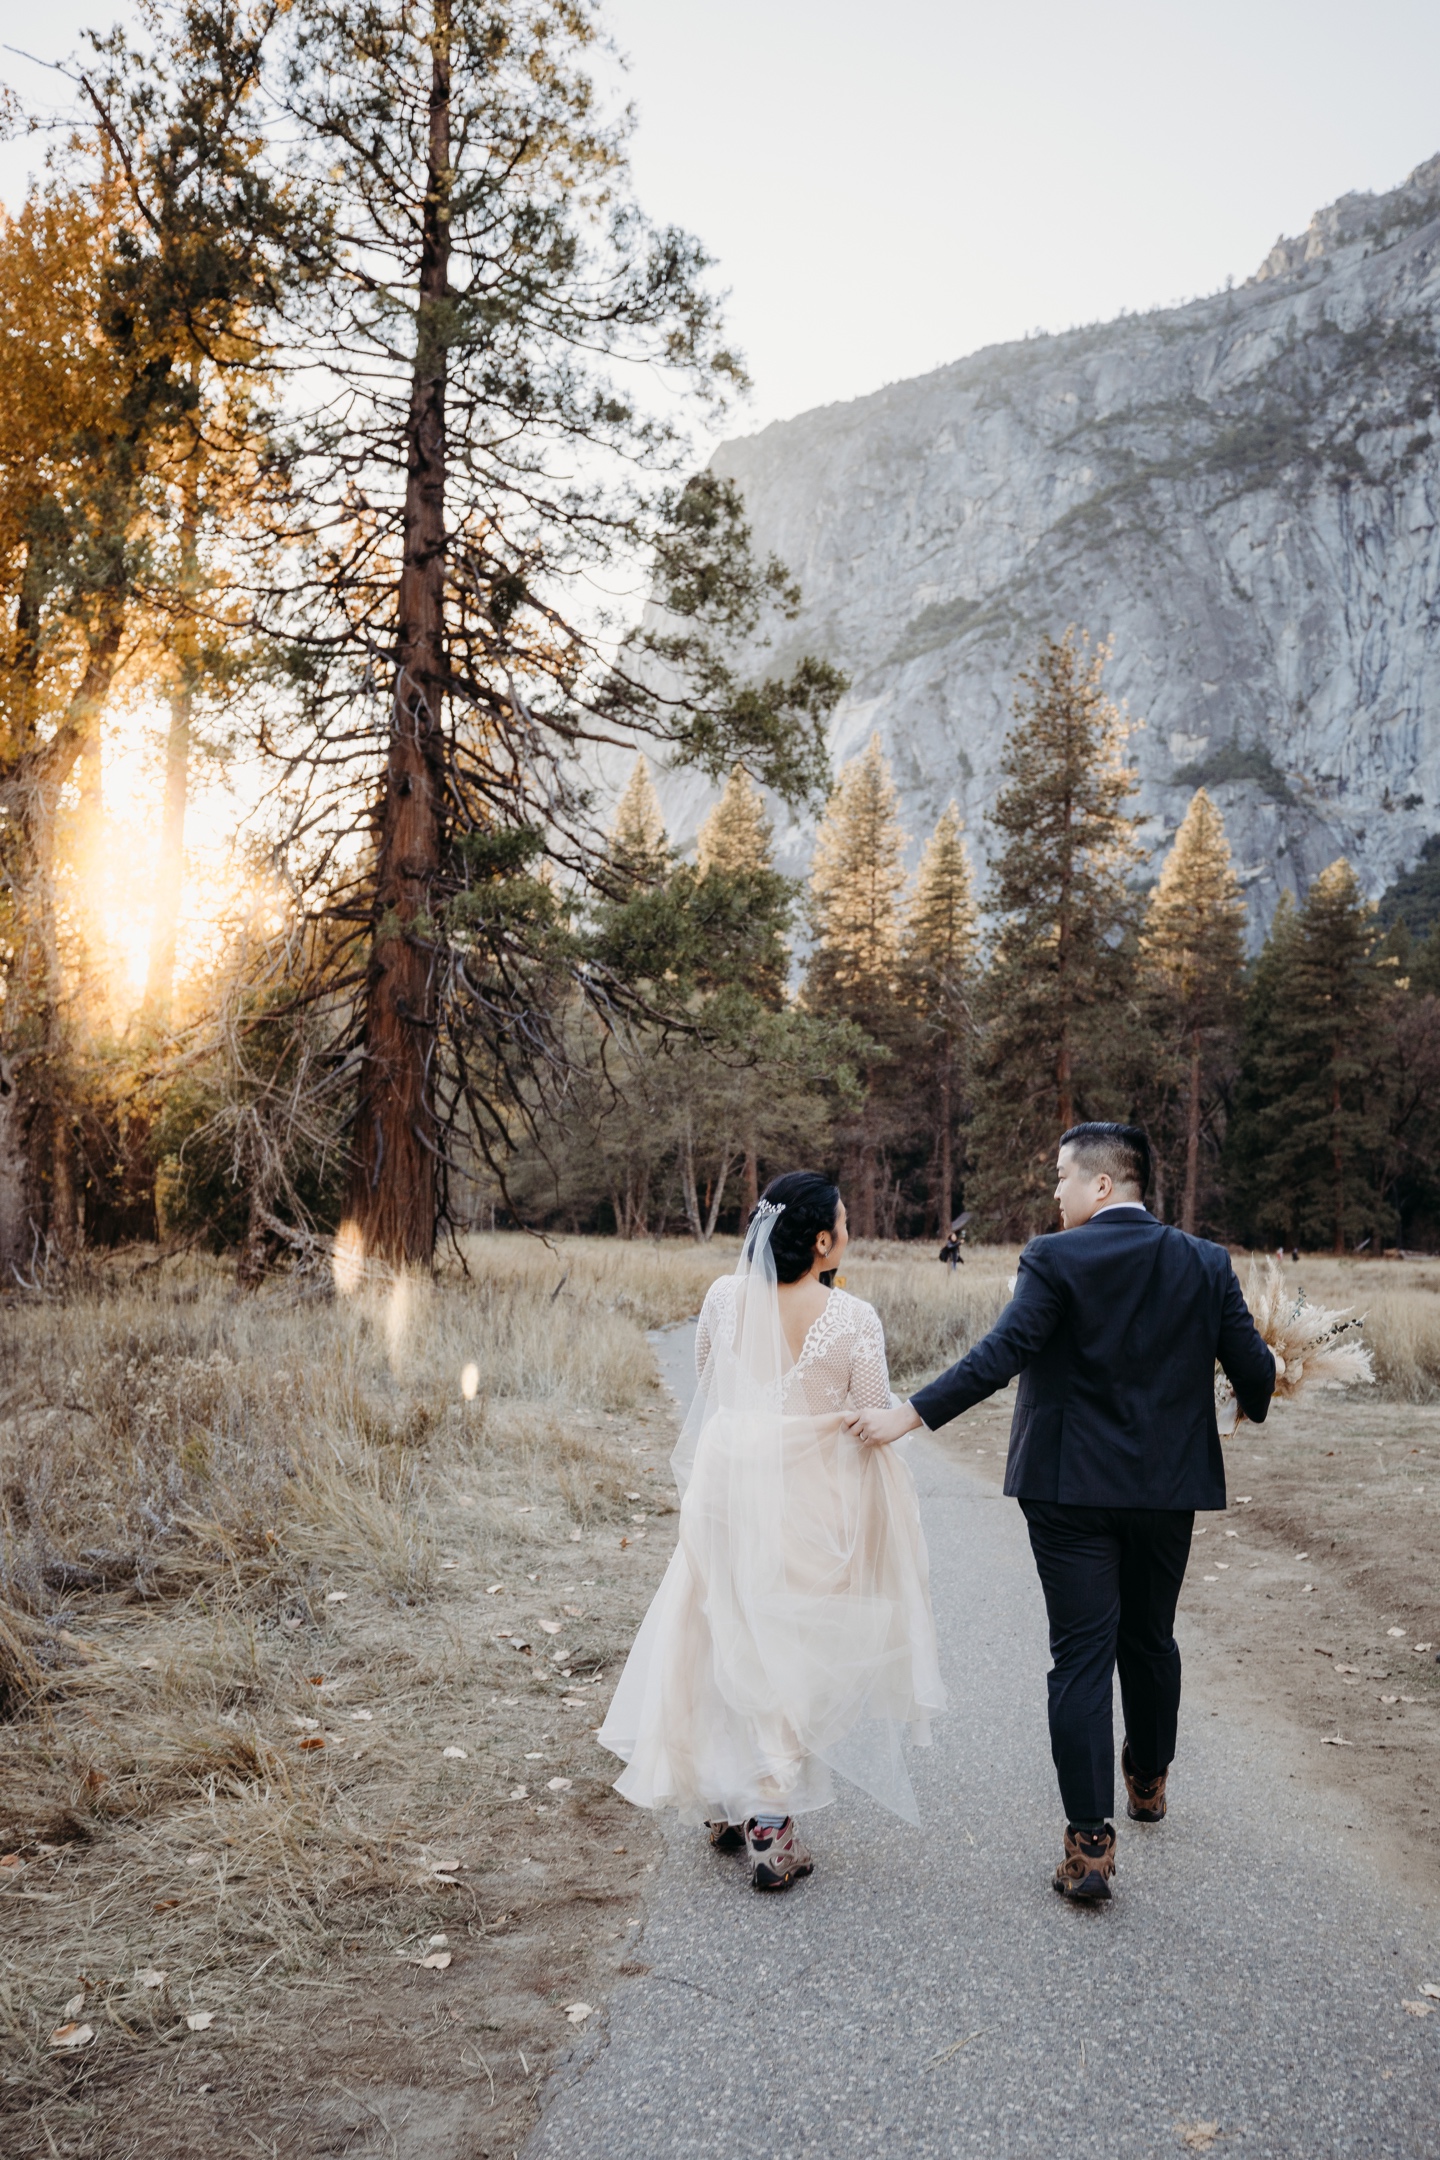 Groom helps his bride hold her wedding dress as they walk down a hiking trail in Yosemite as the sun sets after their elopement.